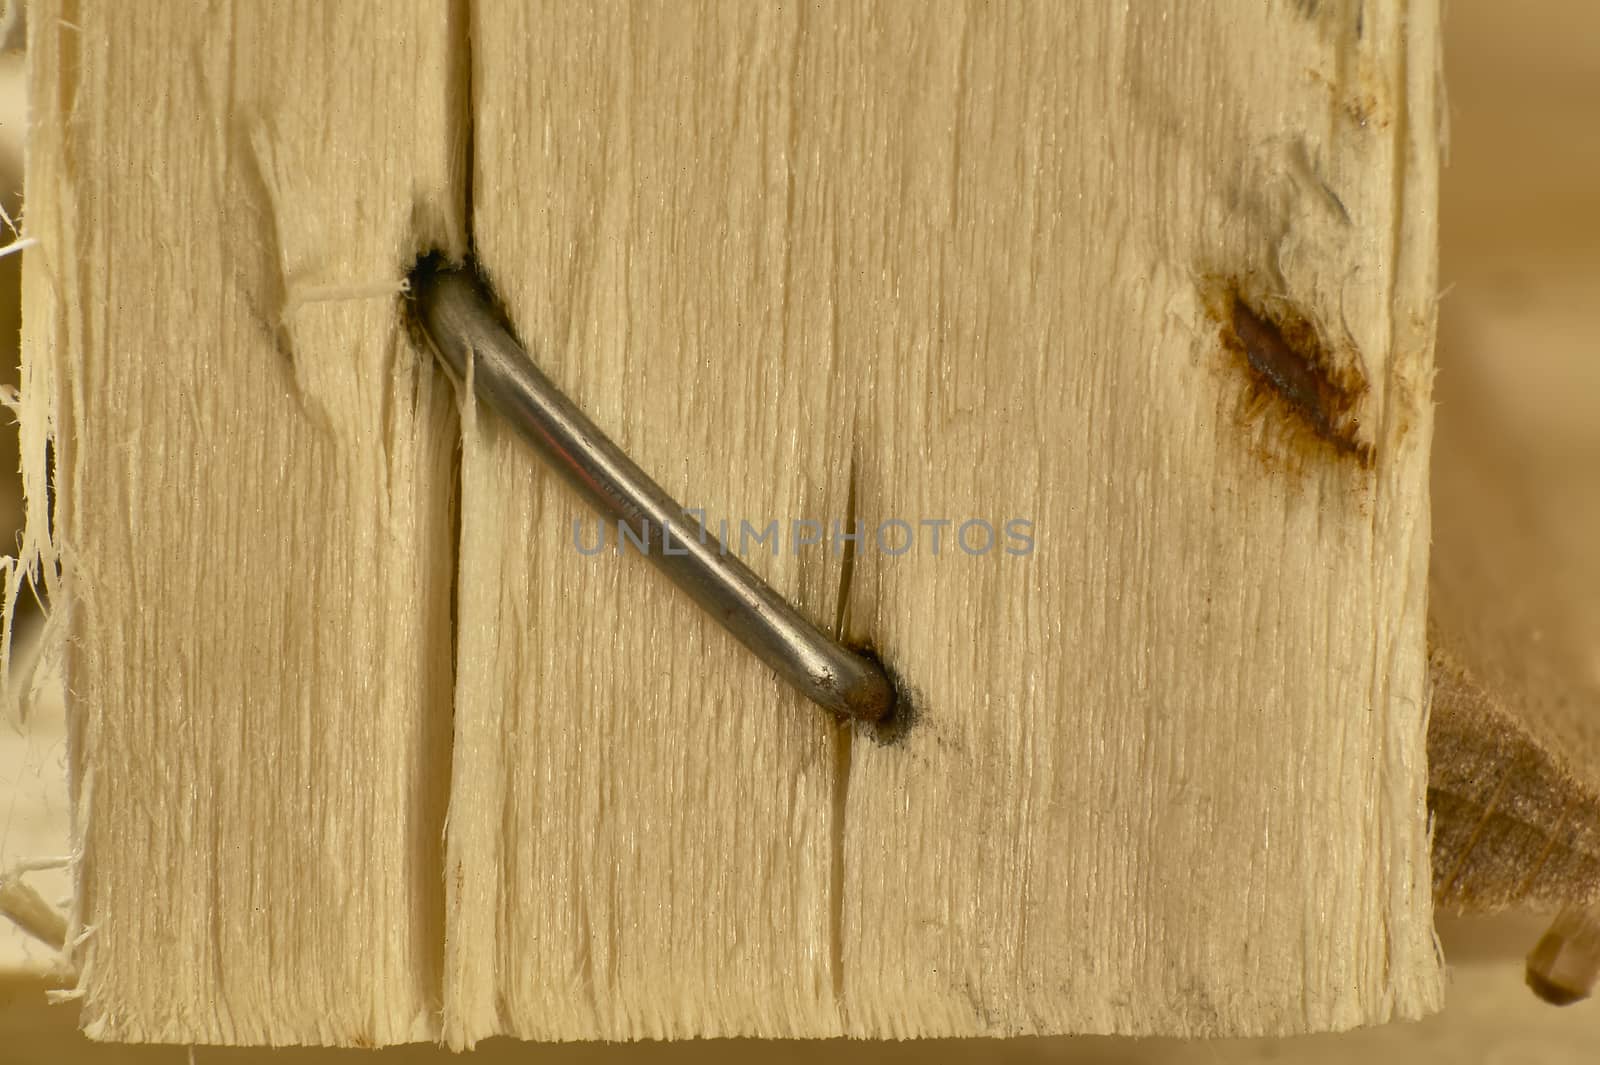 Magnifying an iron staple (nail) used to hold a wooden construction.